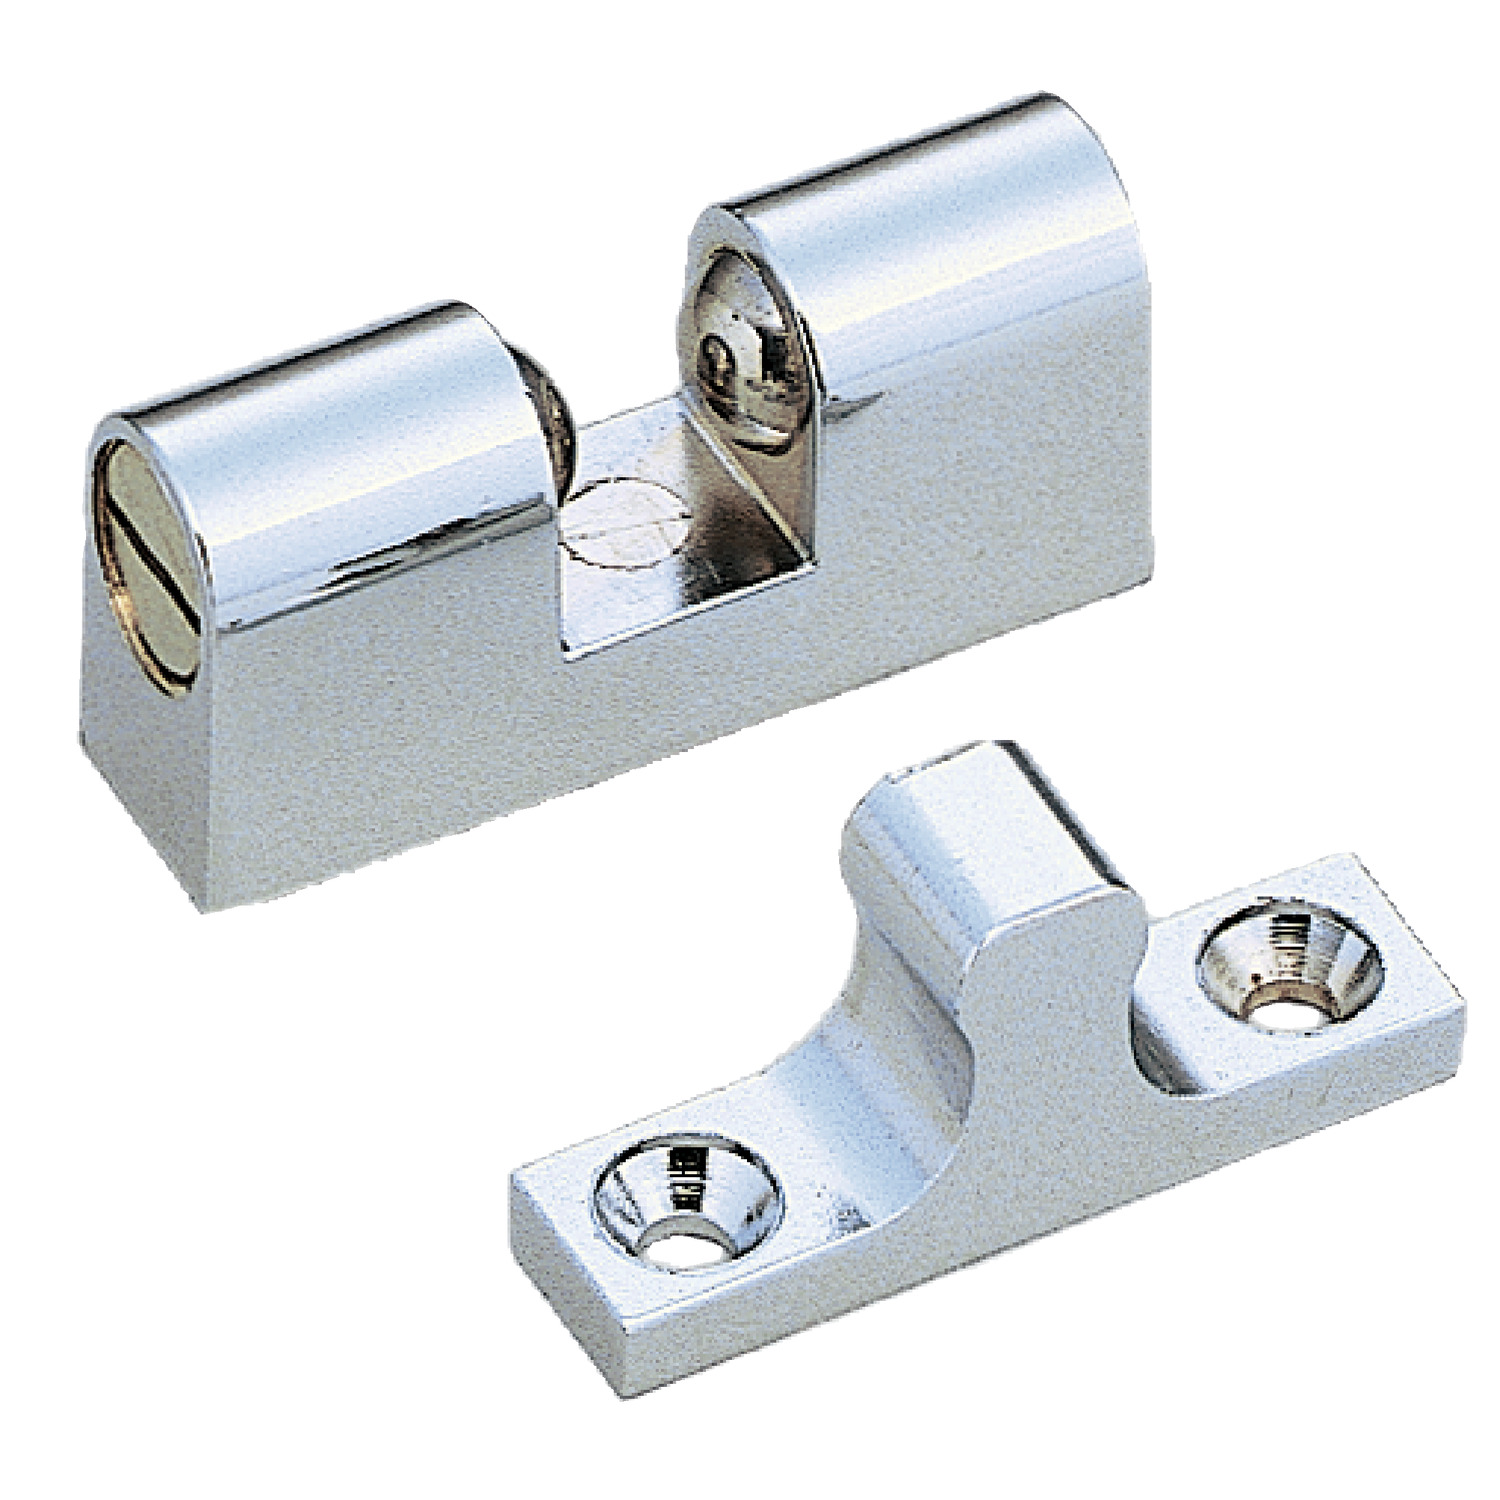 Tension Catches Zinc alloys tension catches. Available in two sizes upto 3,9Kgf pulling force.